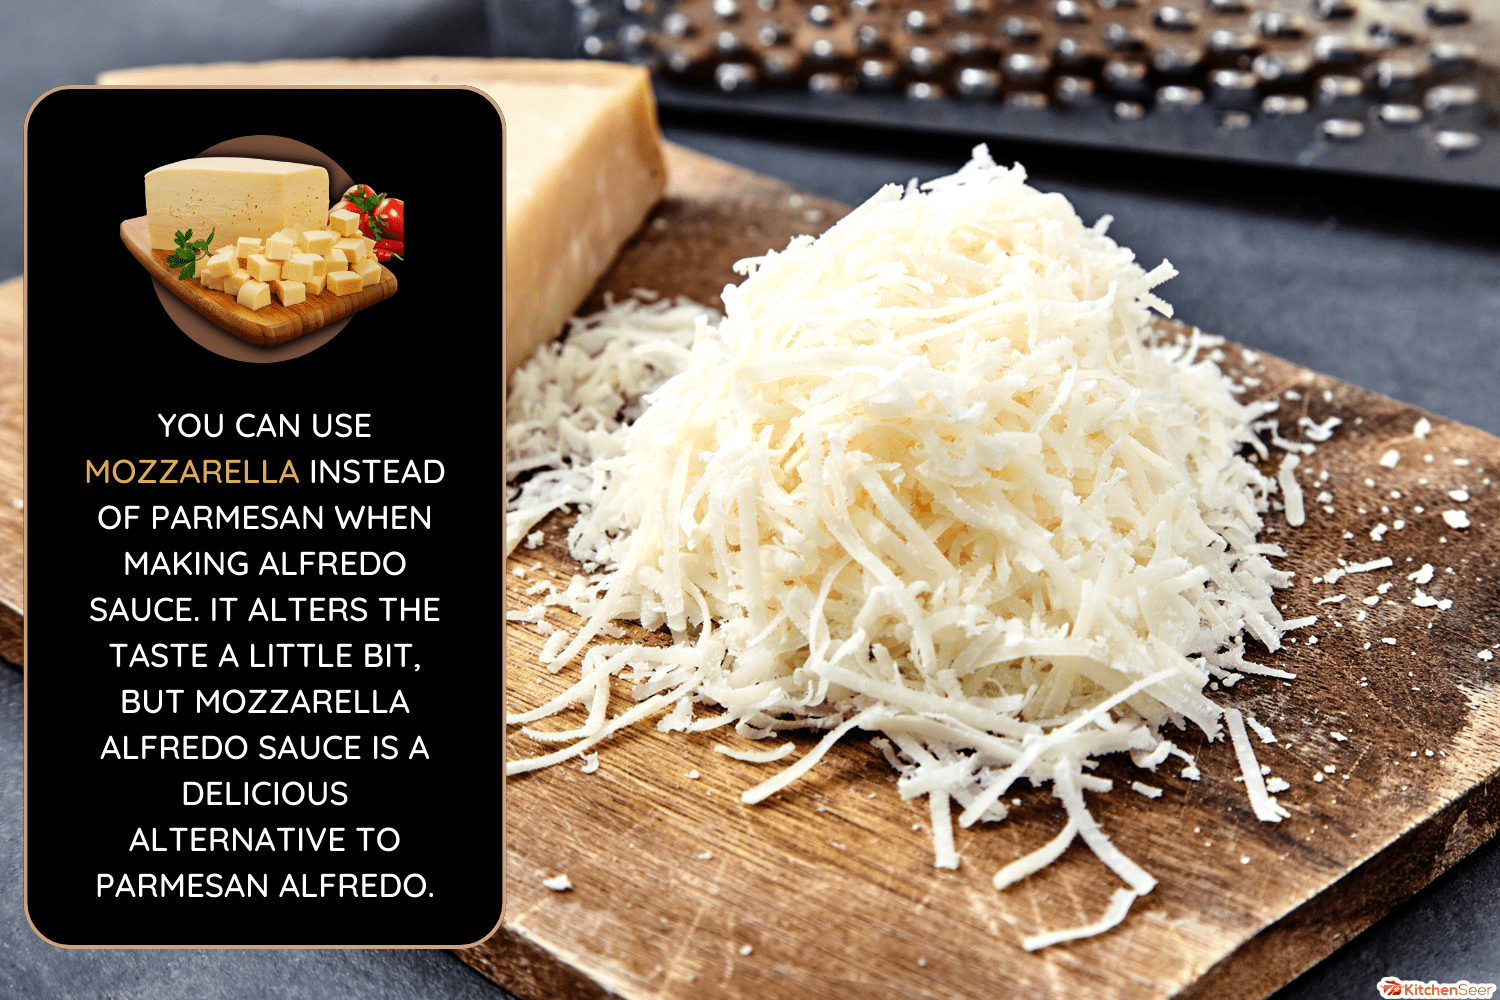 Piece and grated parmigiano reggiano or parmesan cheese on wwood board on checkered napkin . Grated parmesan uses in pasta dishes, soups, risottos and grated over salads. - Can You Use Mozzarella Instead Of Parmesan In Alfredo